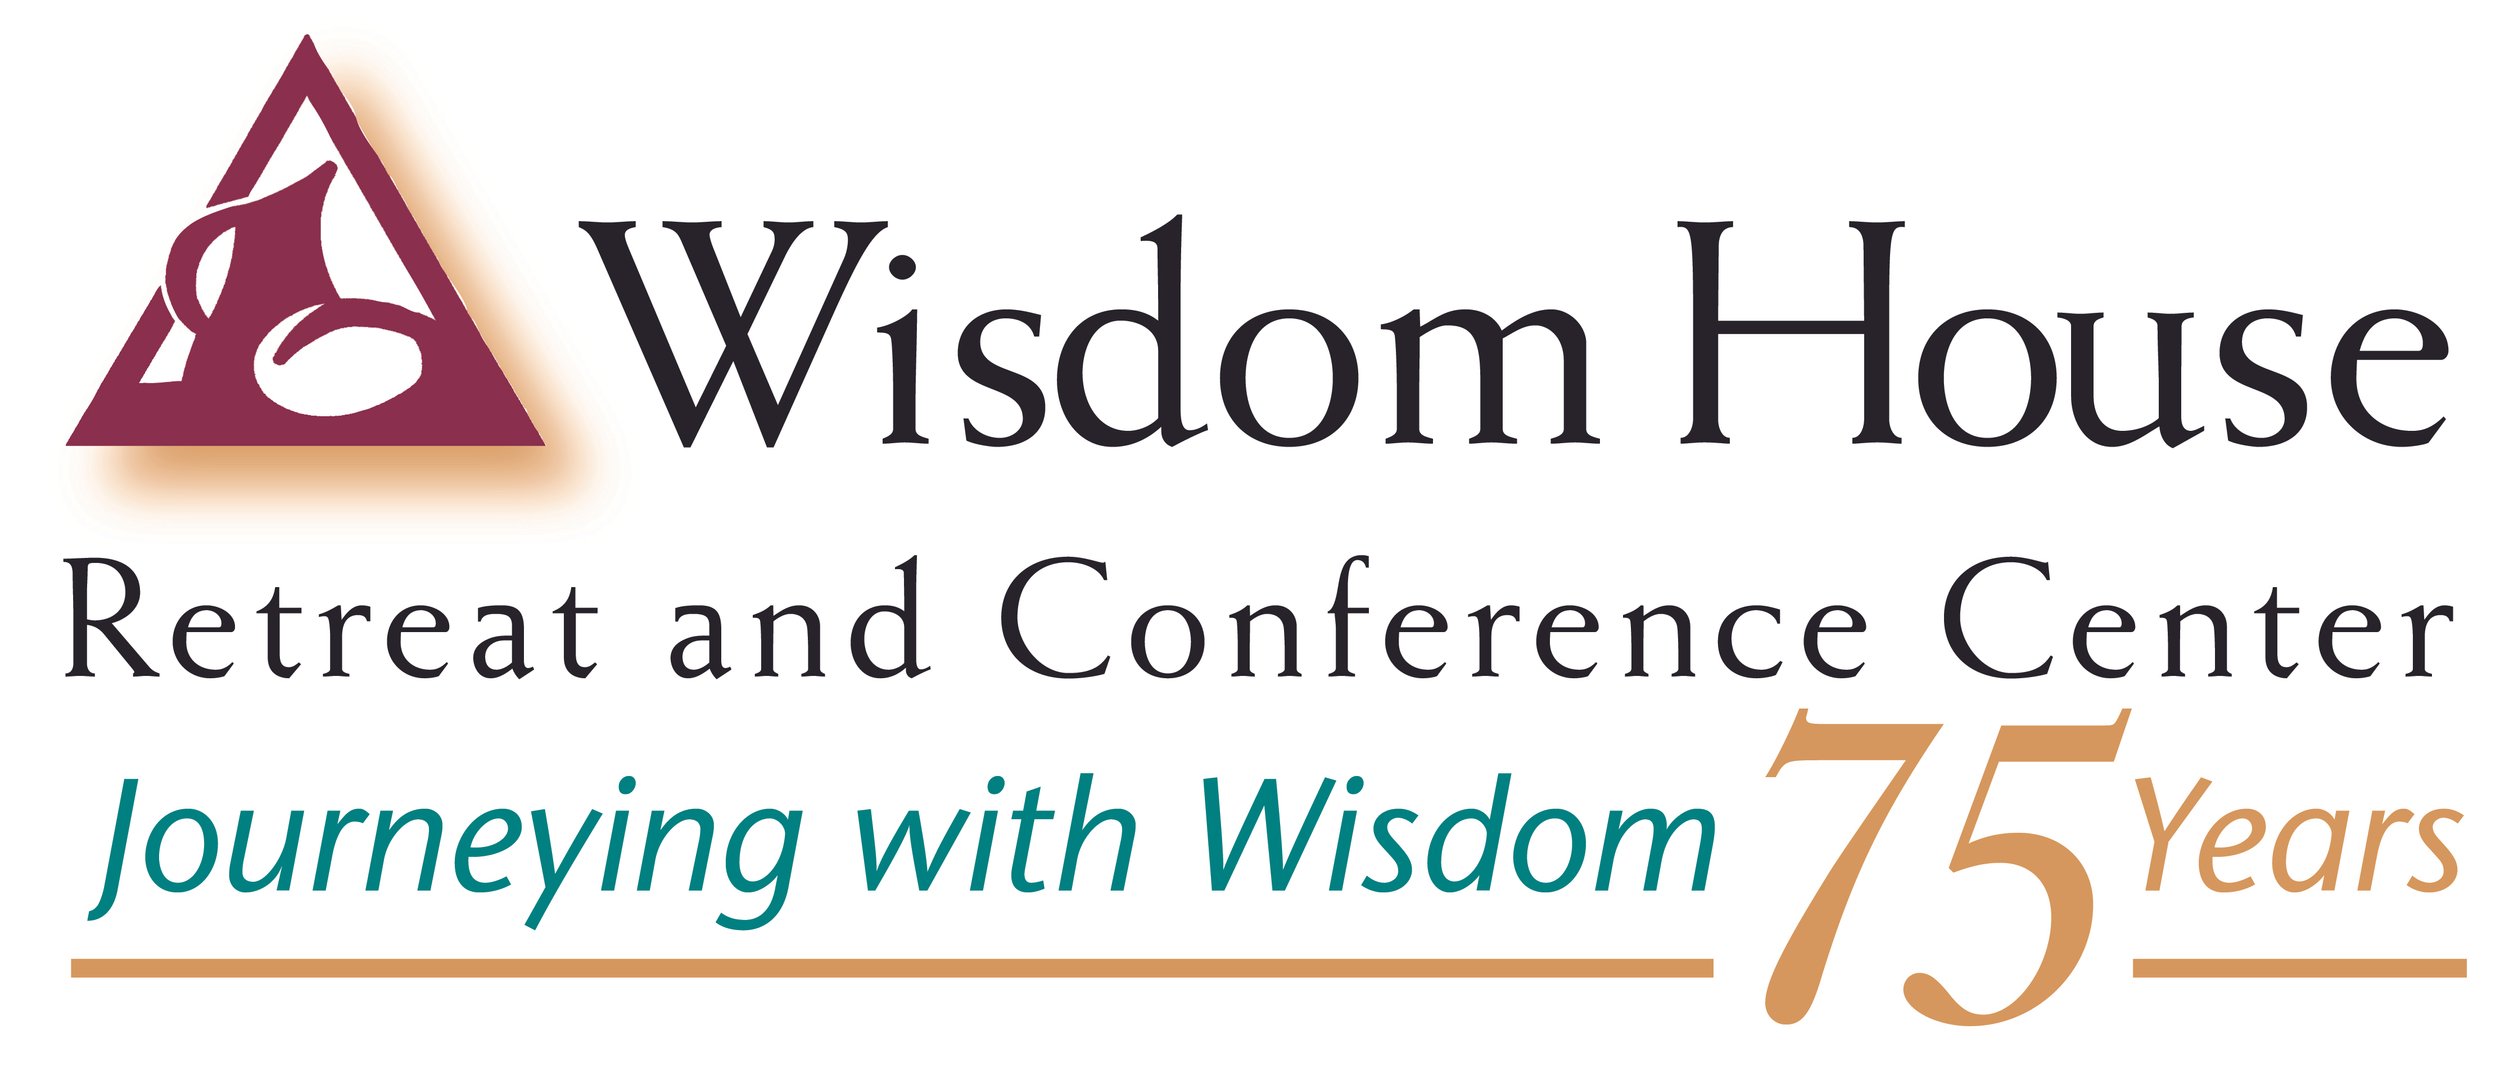 Wisdom House Retreat and Conference Center